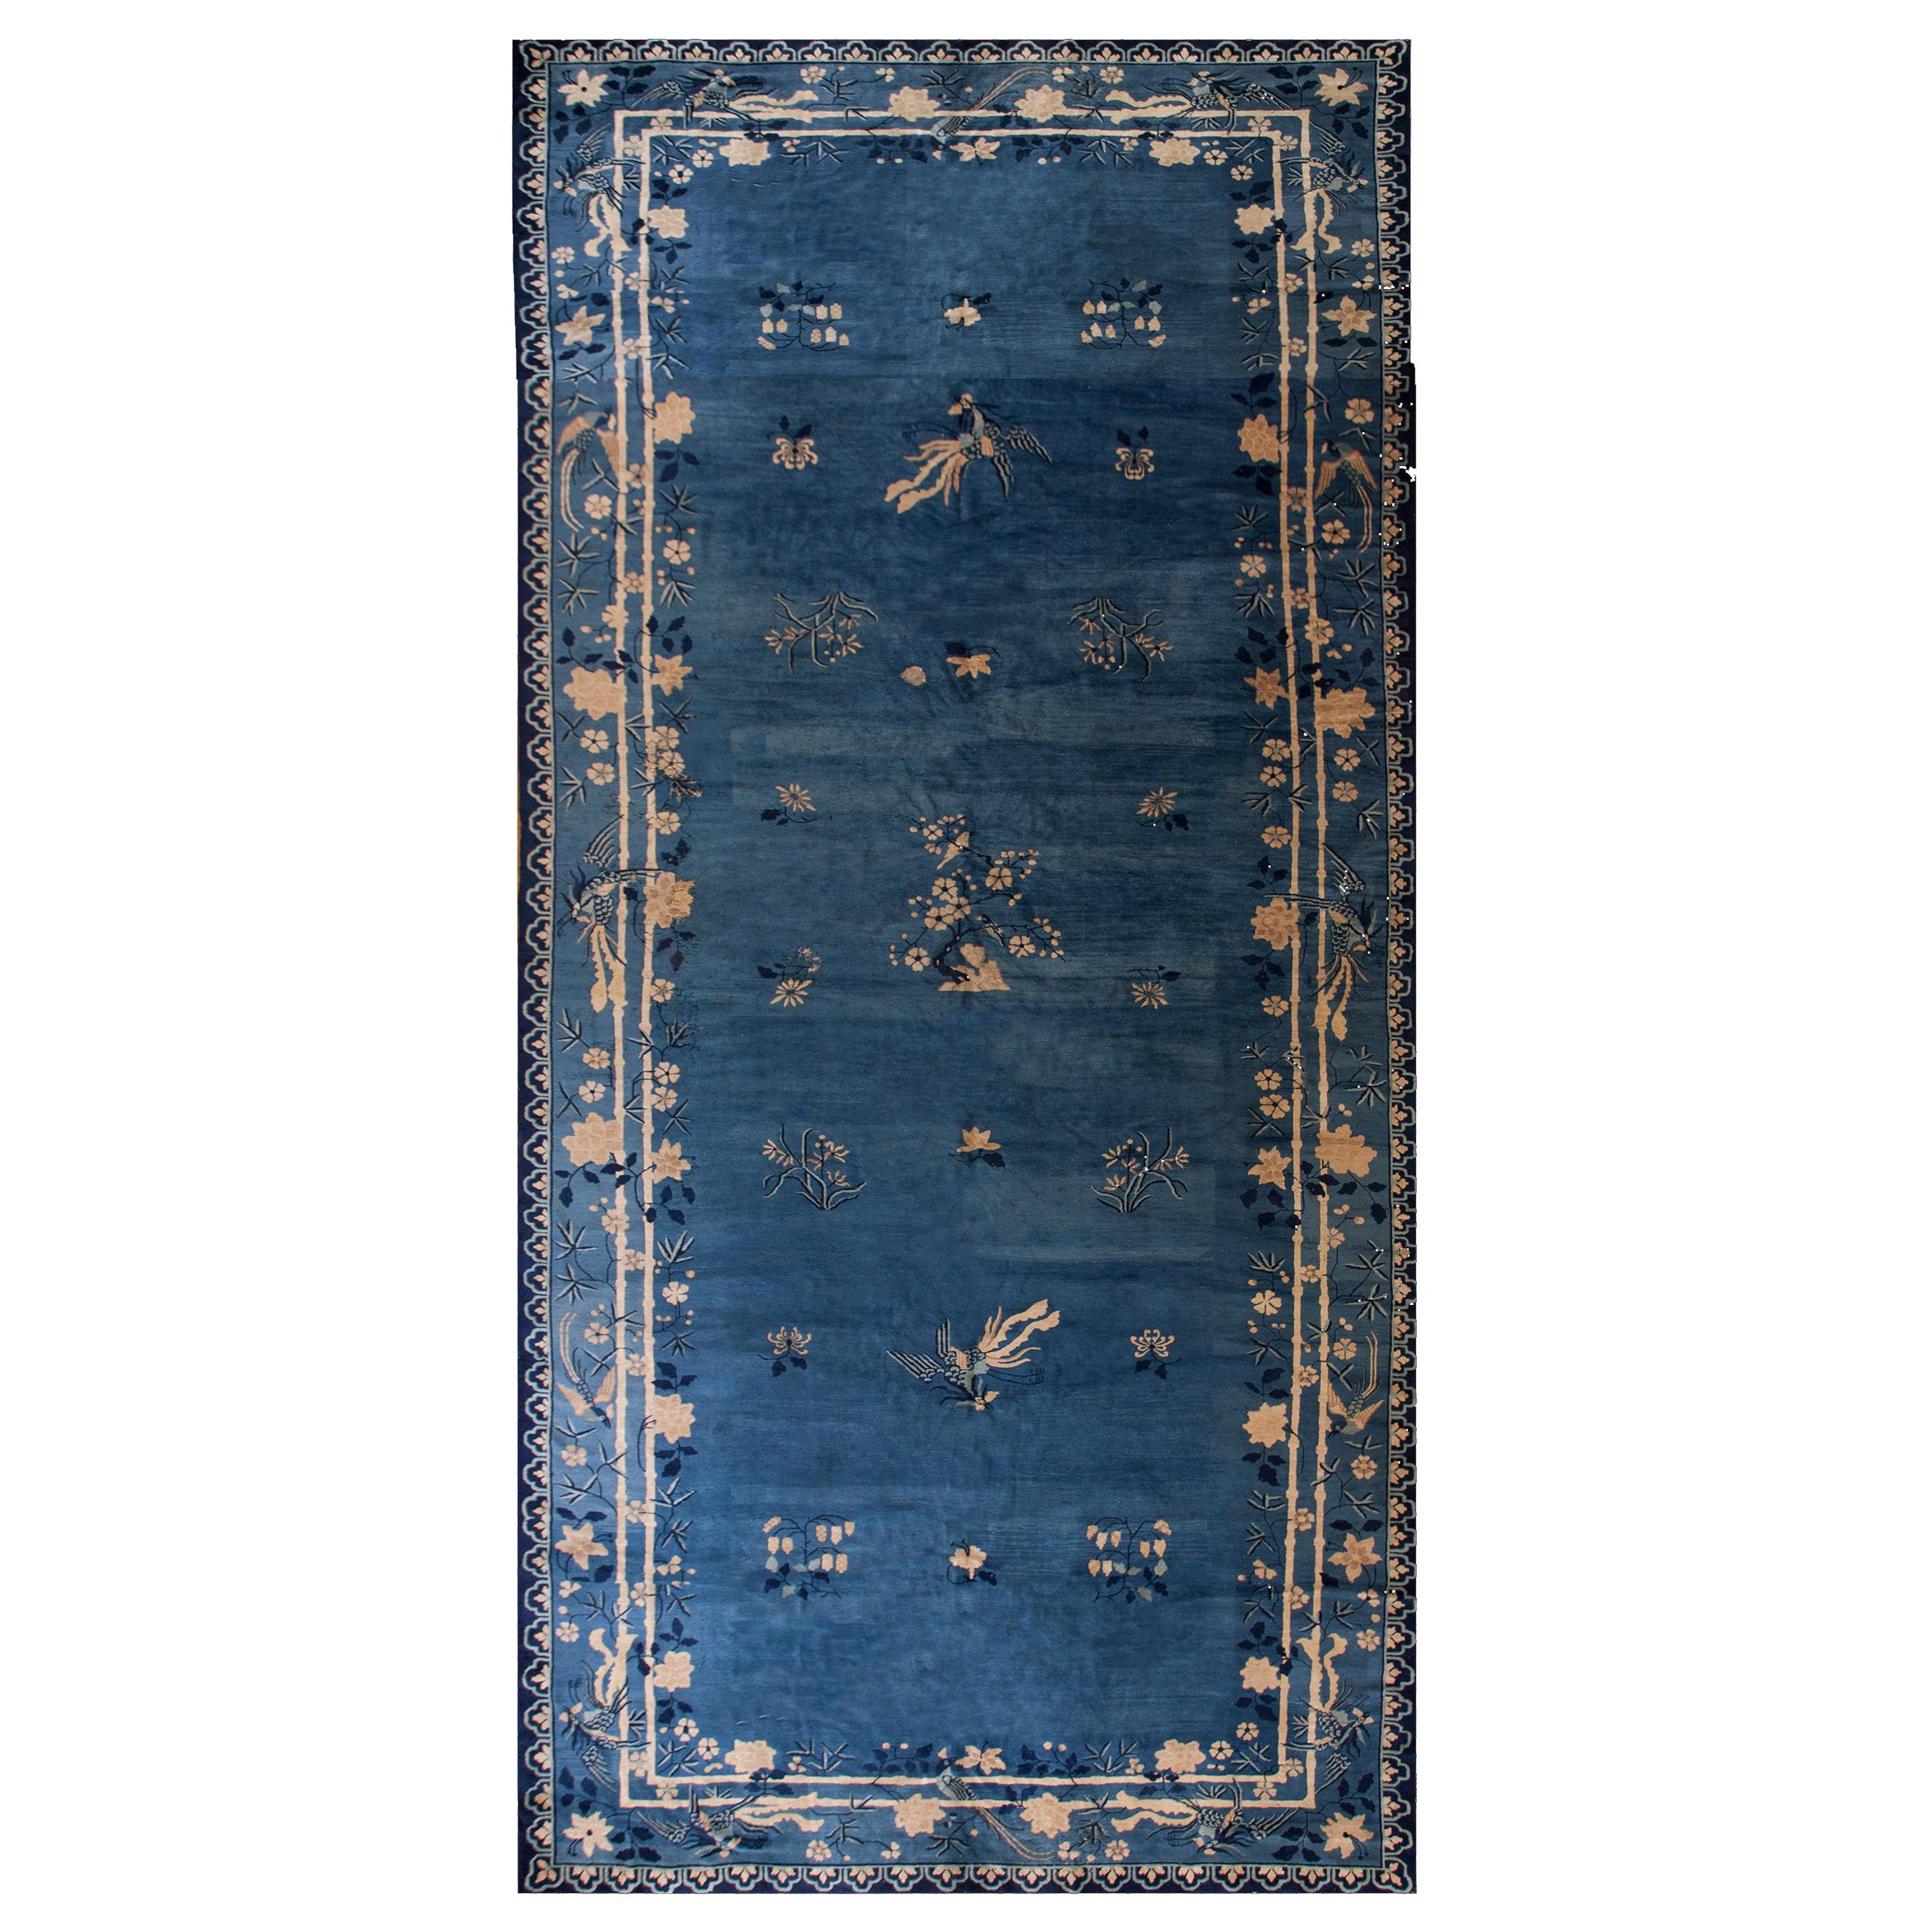 Early 20th Century Chinese Peking Carpet ( 9 6" x 22'6" - 290 x 686 ) For Sale